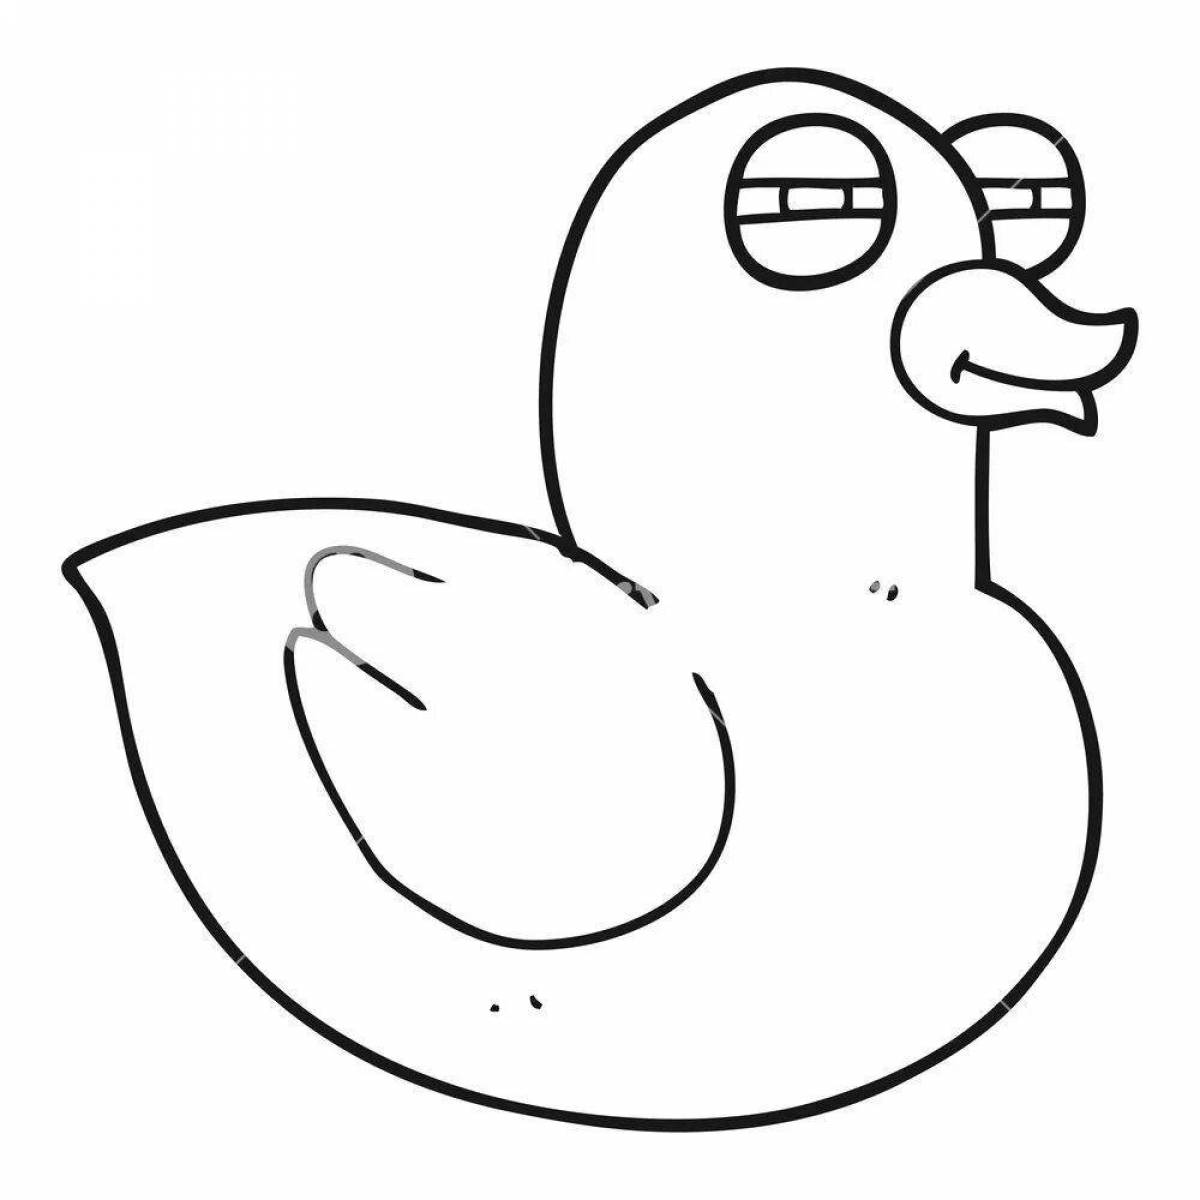 Sparkling rubber duck coloring page